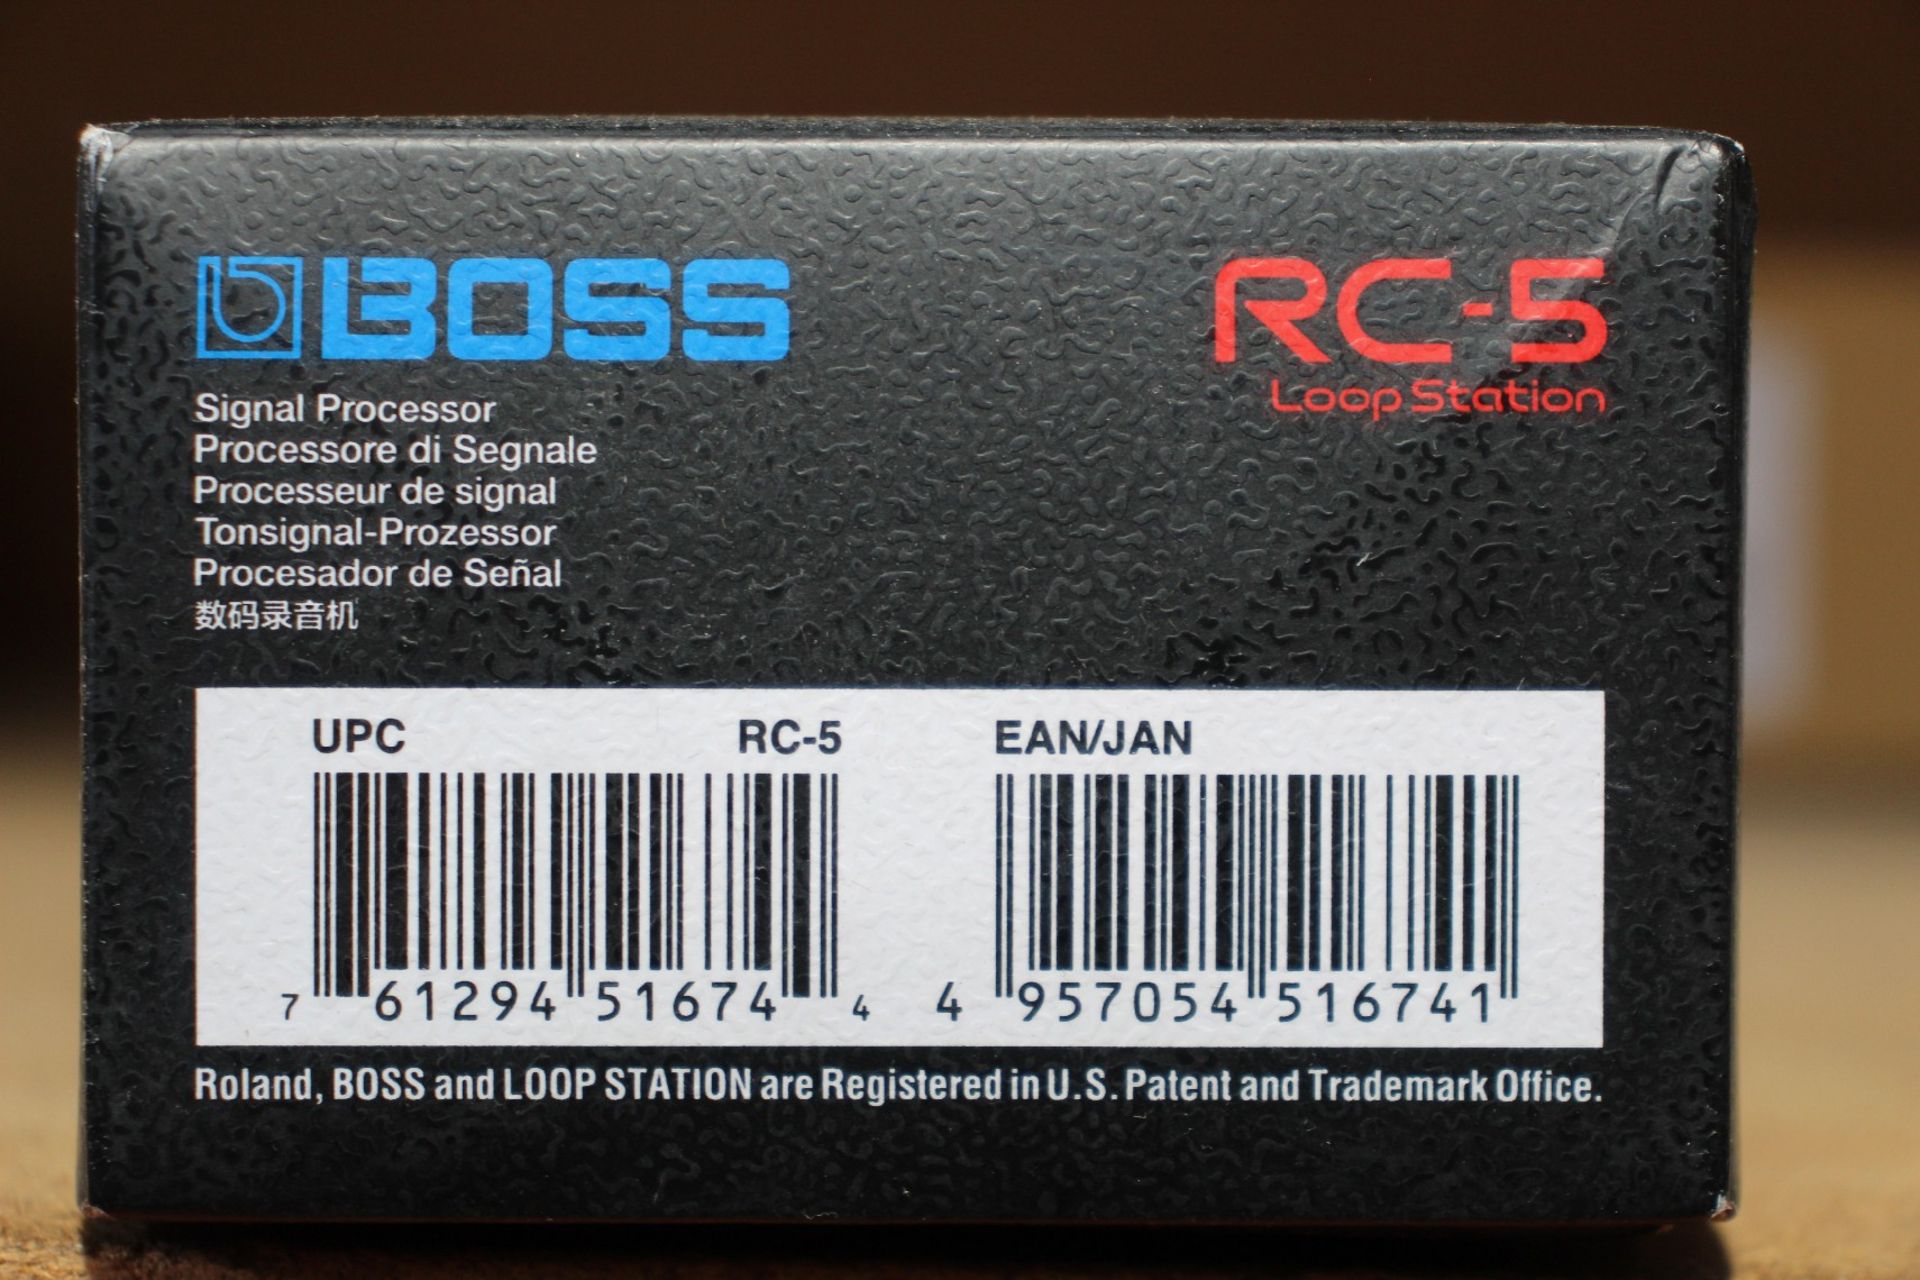 A BOSS RC-5 Compact Loop Station Pedal.